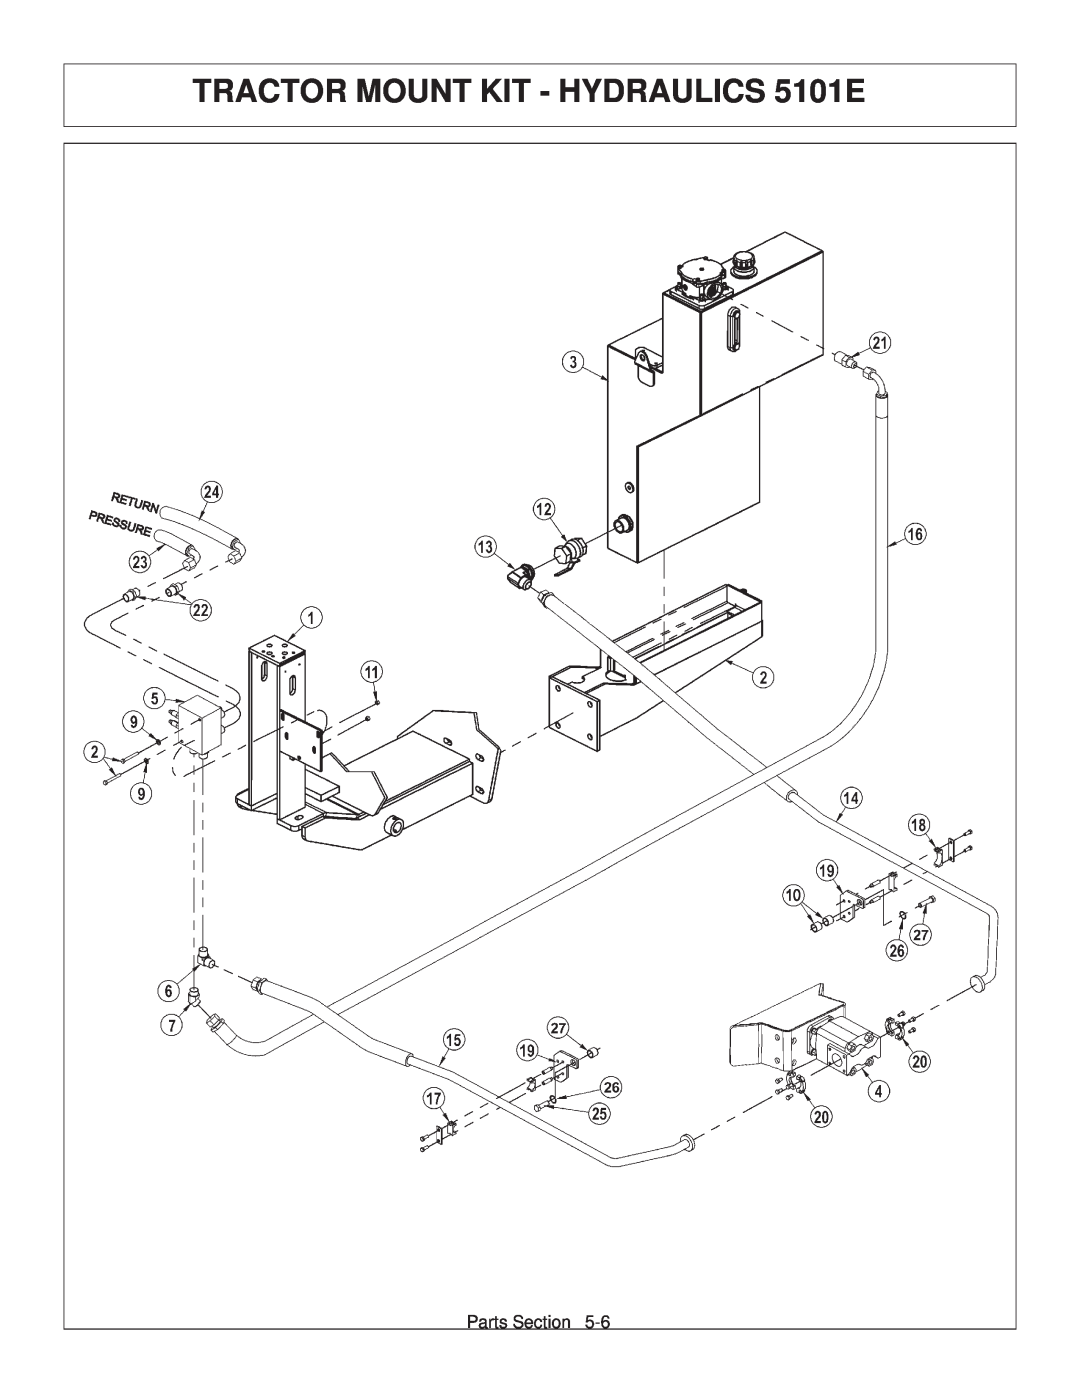 Tiger Products Co., Ltd JD 5093E, JD 5101E, JD 5083E manual TRACTOR MOUNT KIT - HYDRAULICS 5101E, Parts Section 